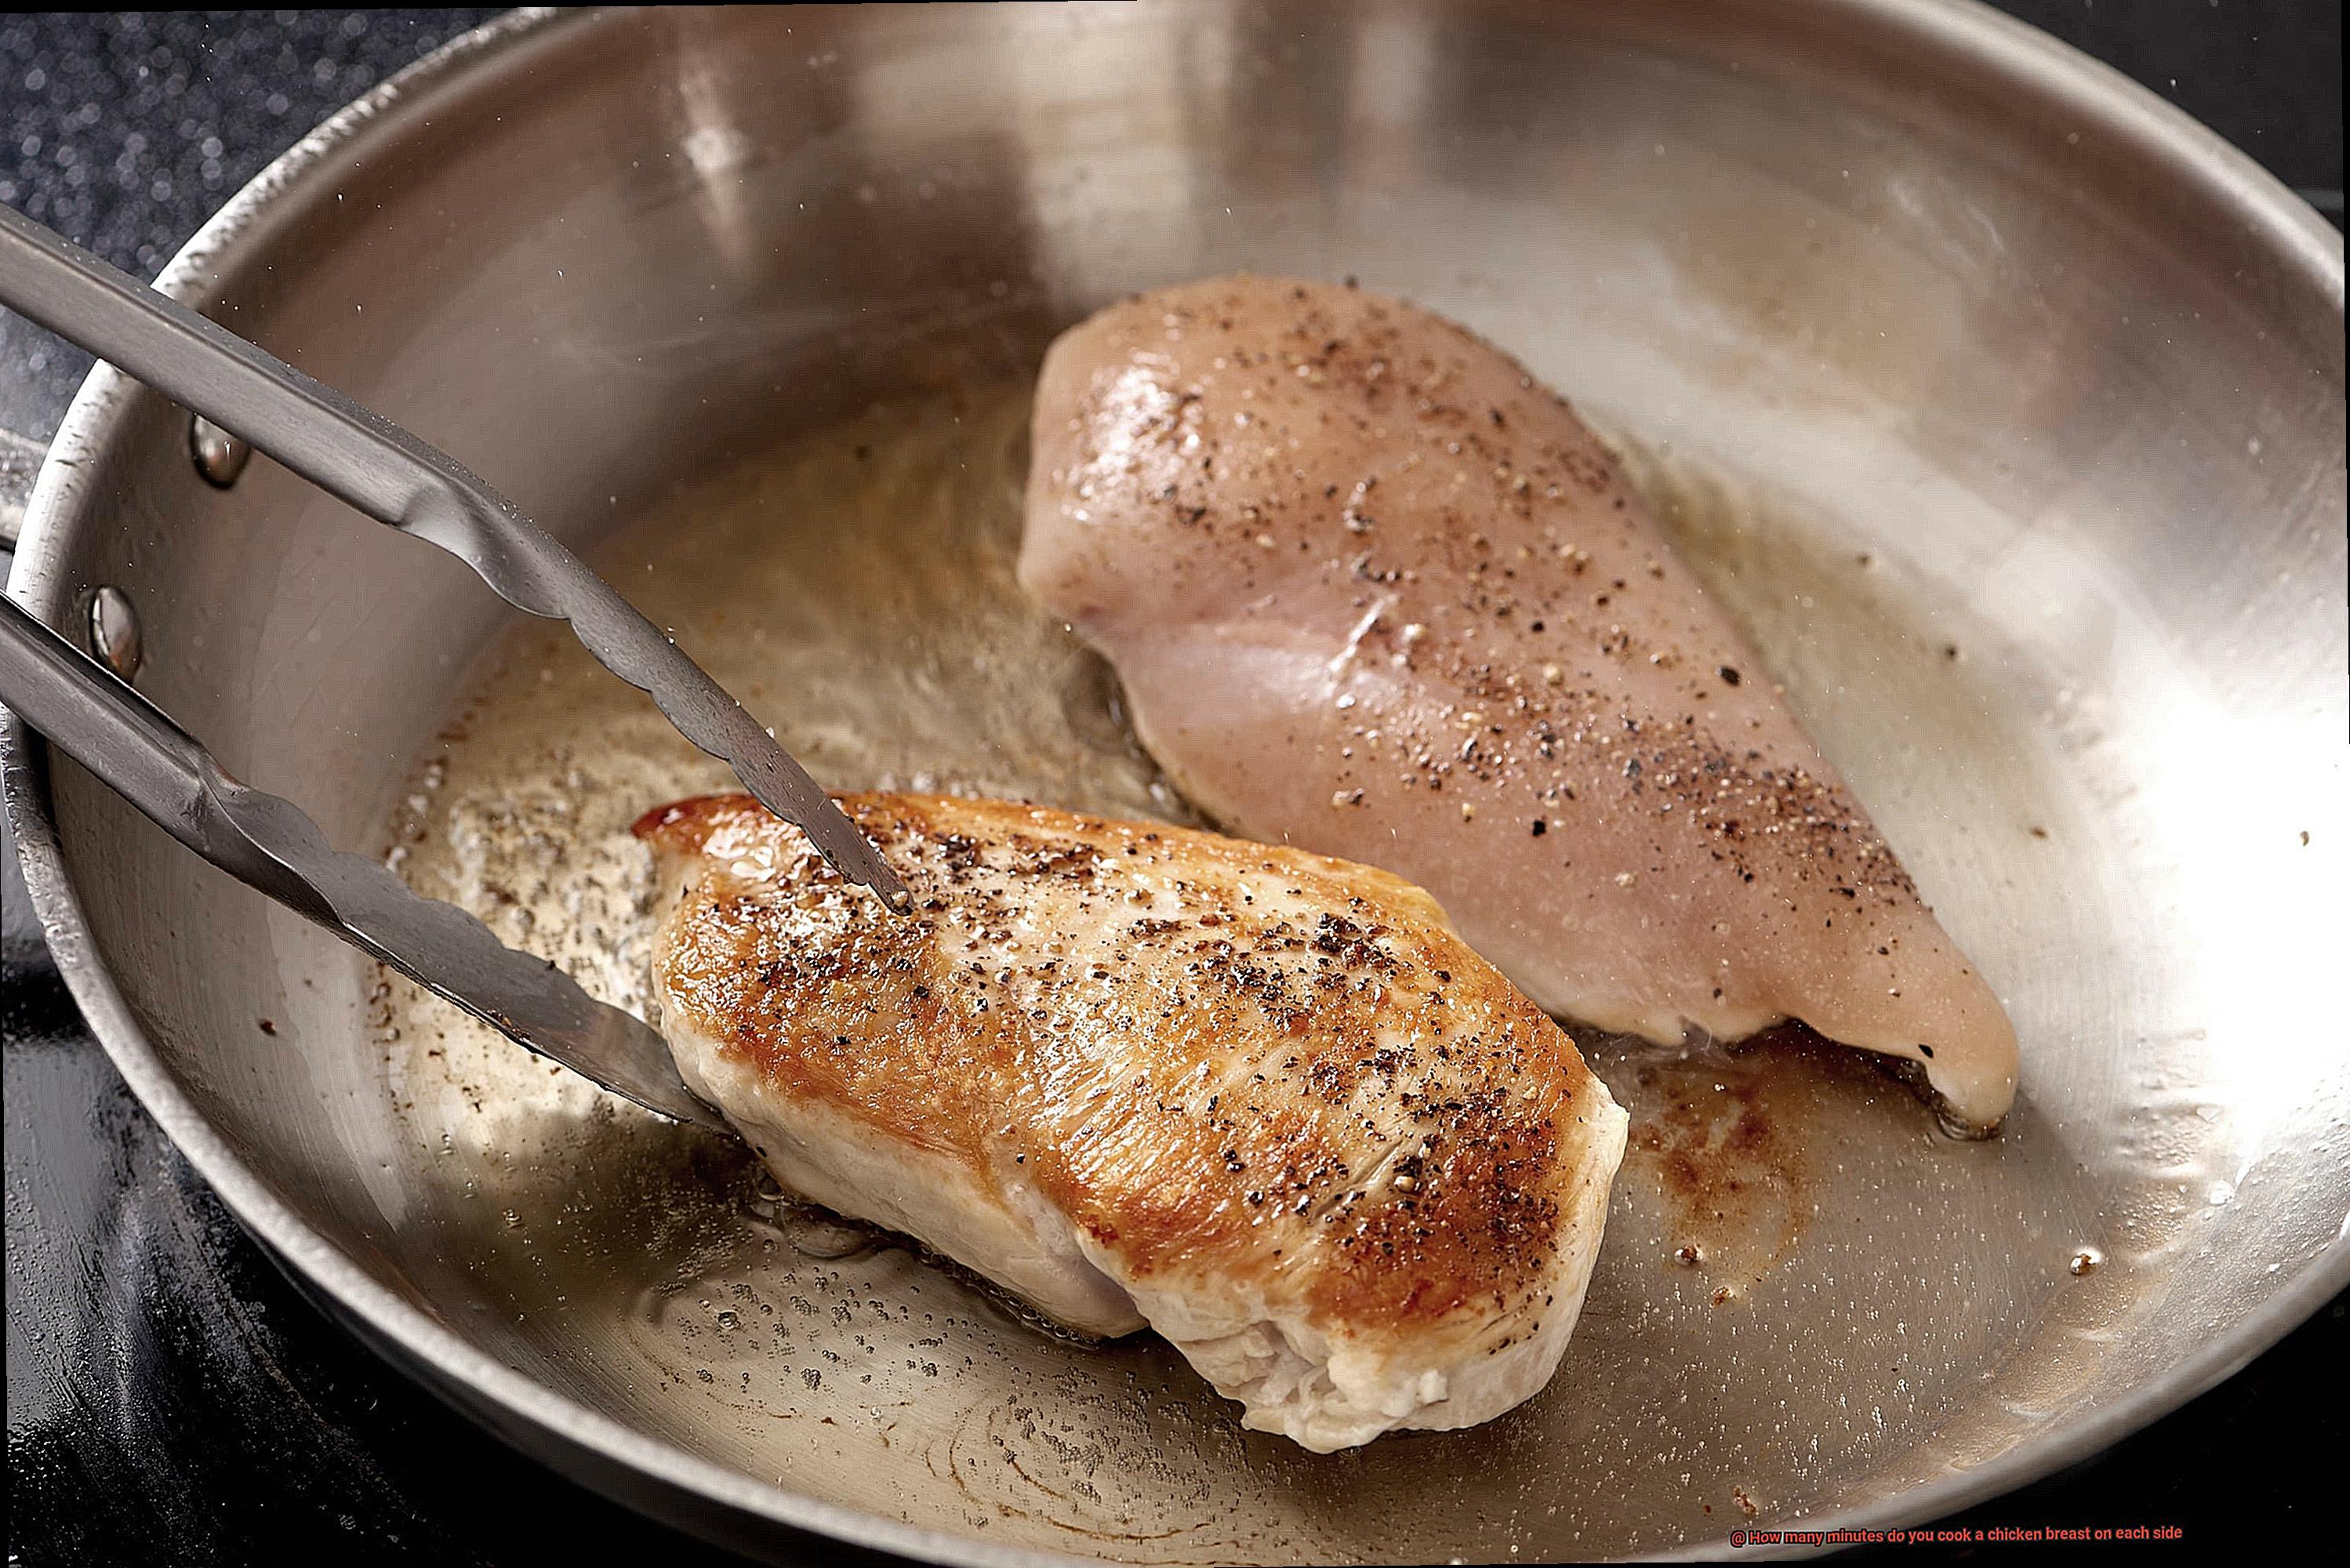 How many minutes do you cook a chicken breast on each side-2